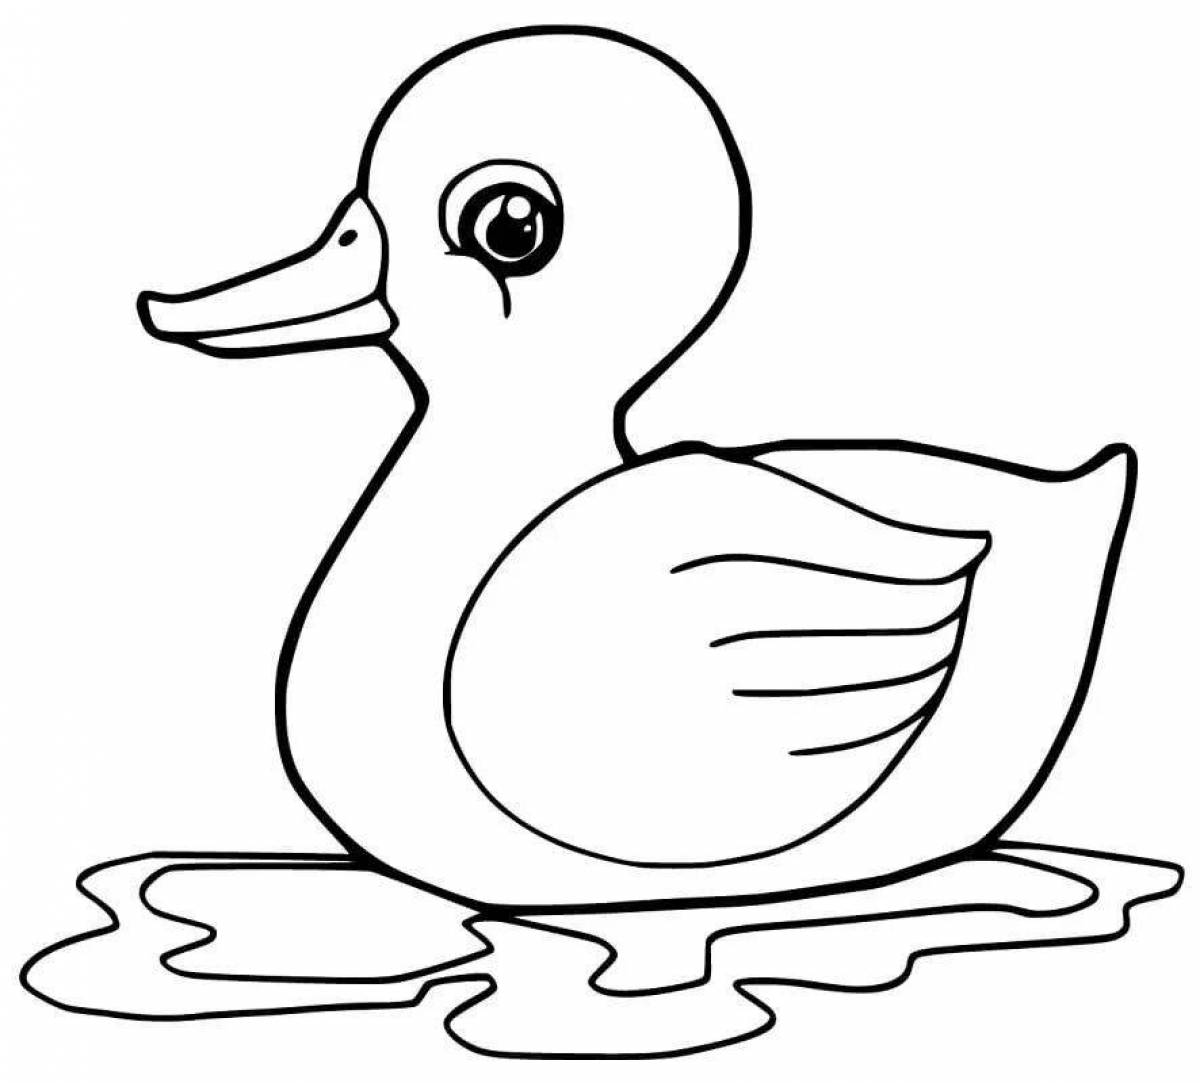 Coloring page charming lanfan duck